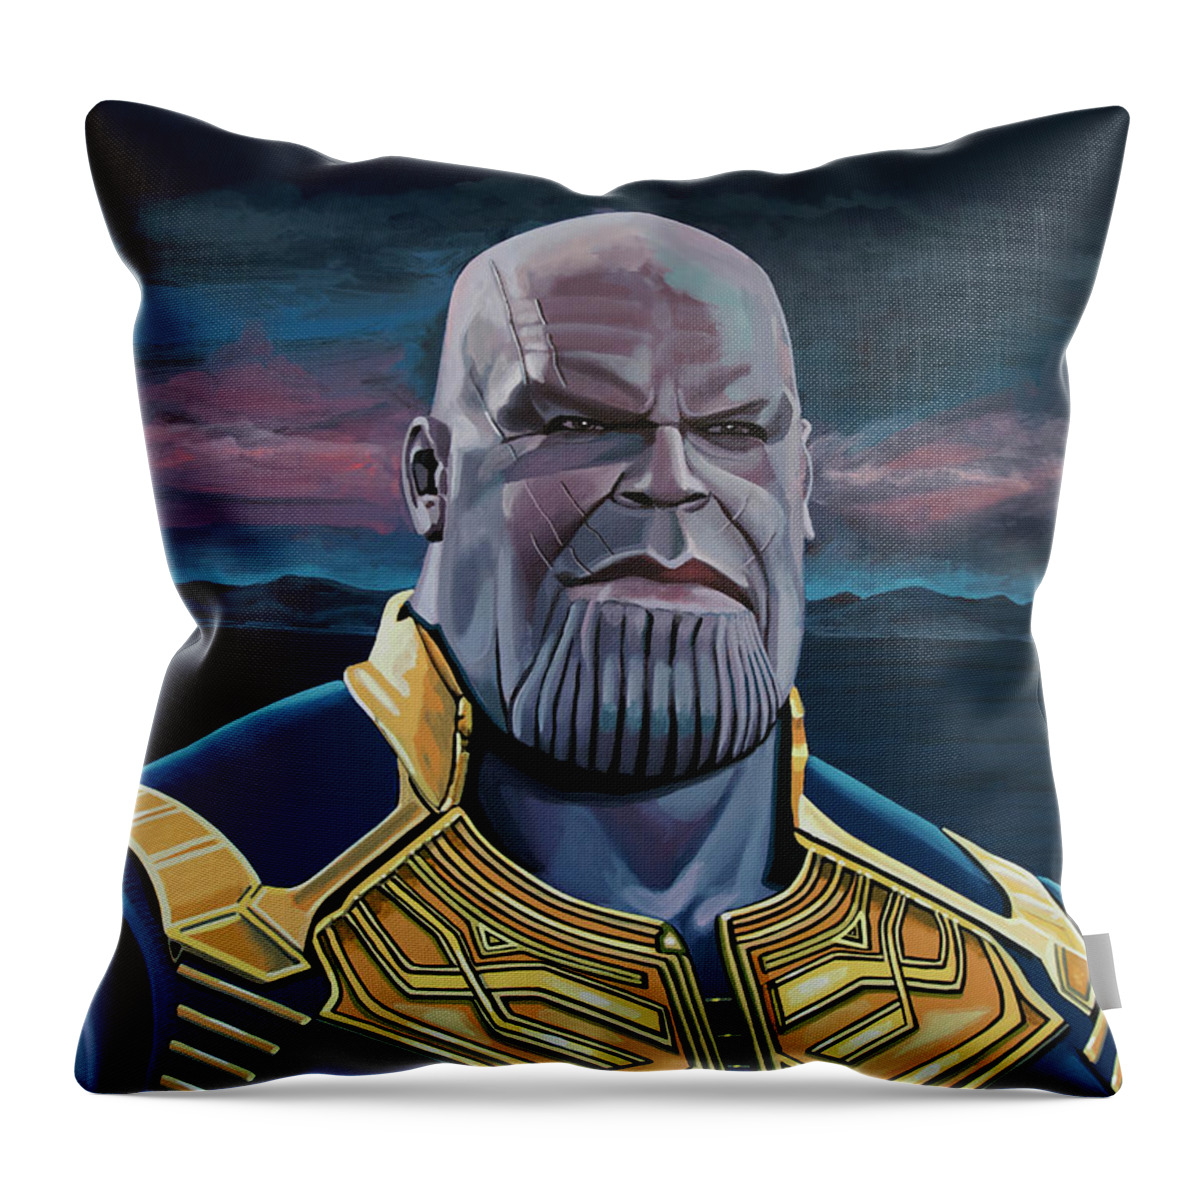 Thanos Throw Pillow featuring the painting Thanos Painting by Paul Meijering